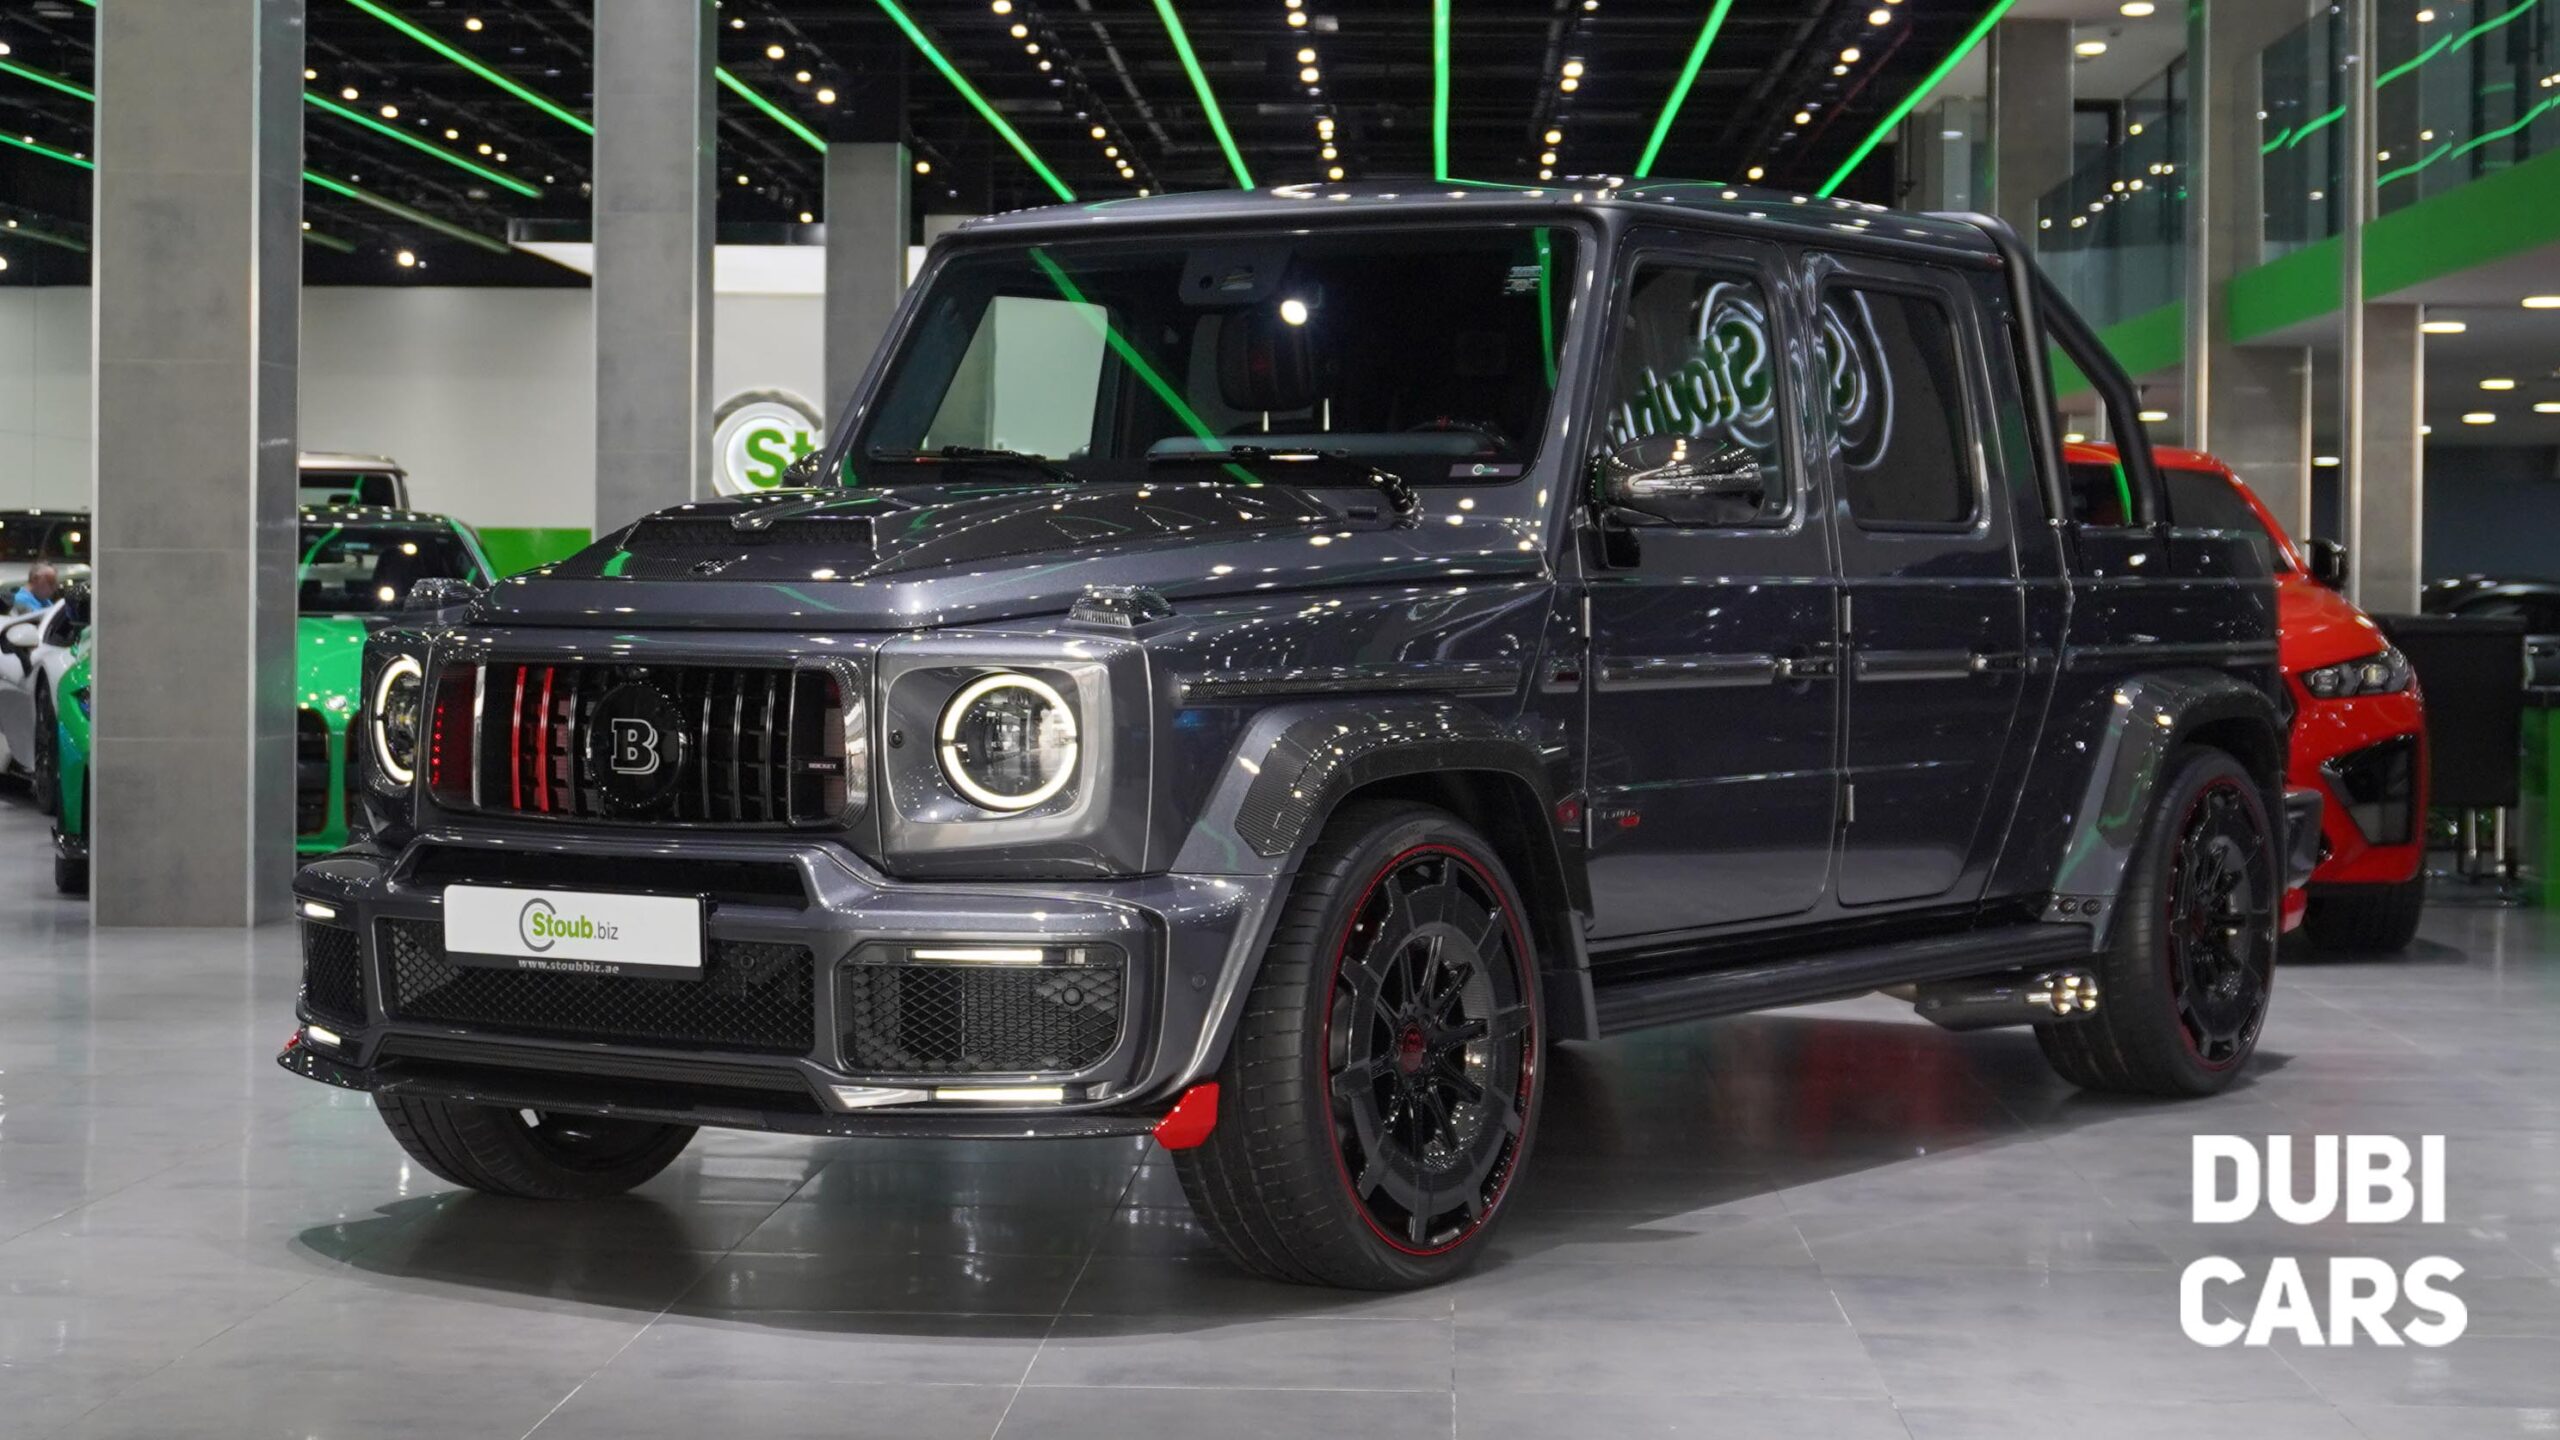 Brabus P 900 Rocket Edition Review — A 1-Of-10 Exotic Pickup Truck Like No Other